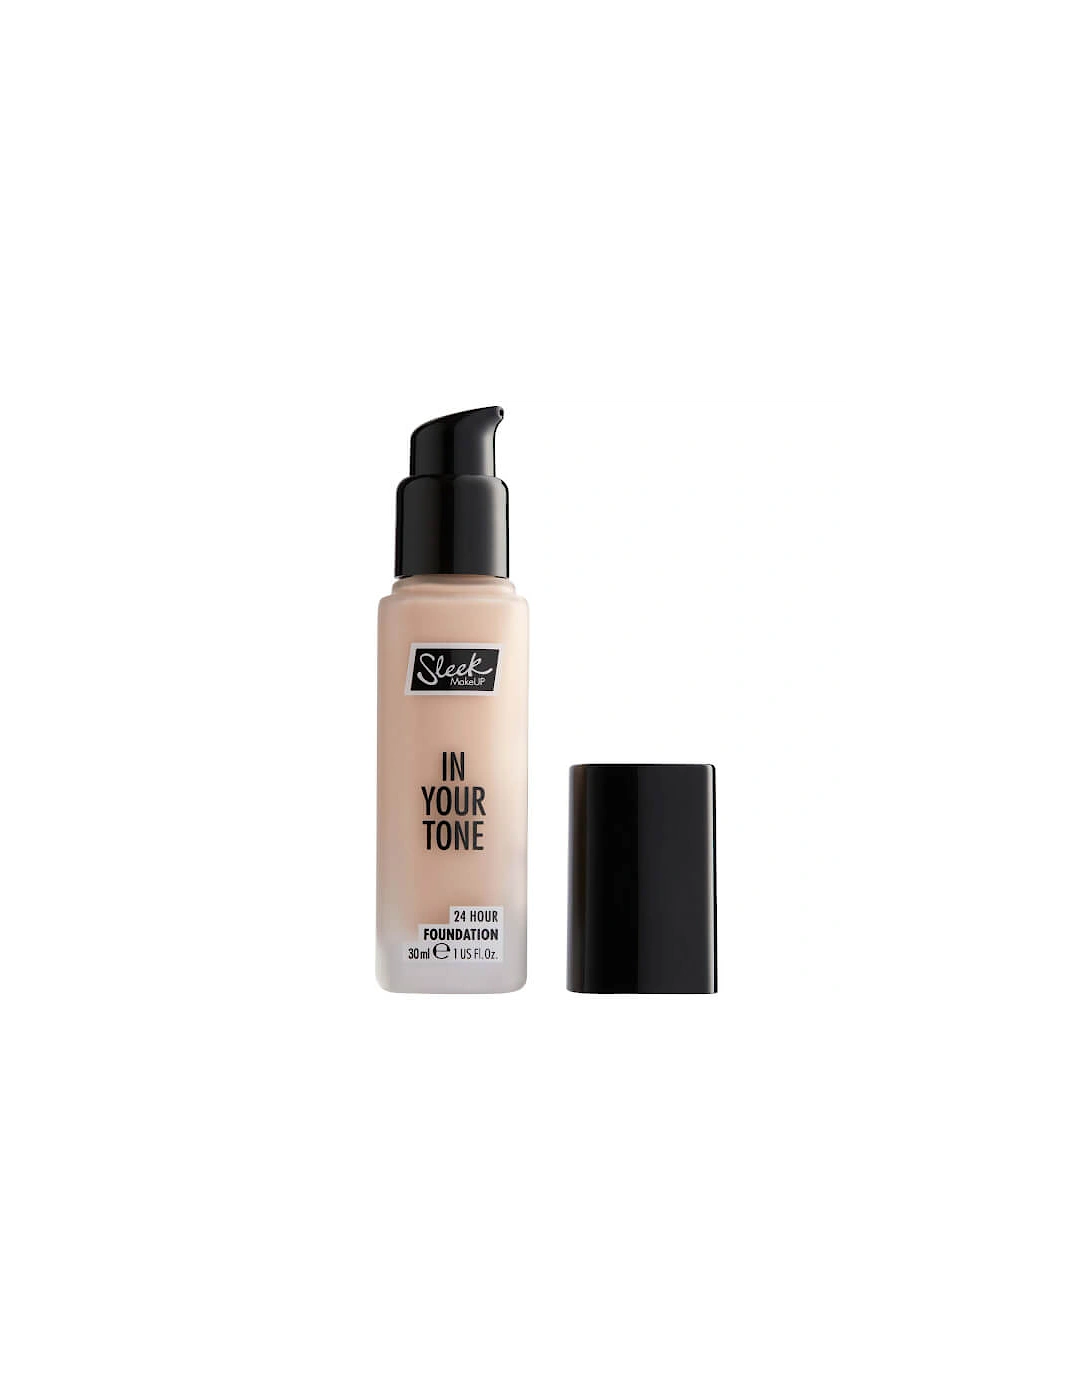 in Your Tone 24 Hour Foundation - 2C, 2 of 1